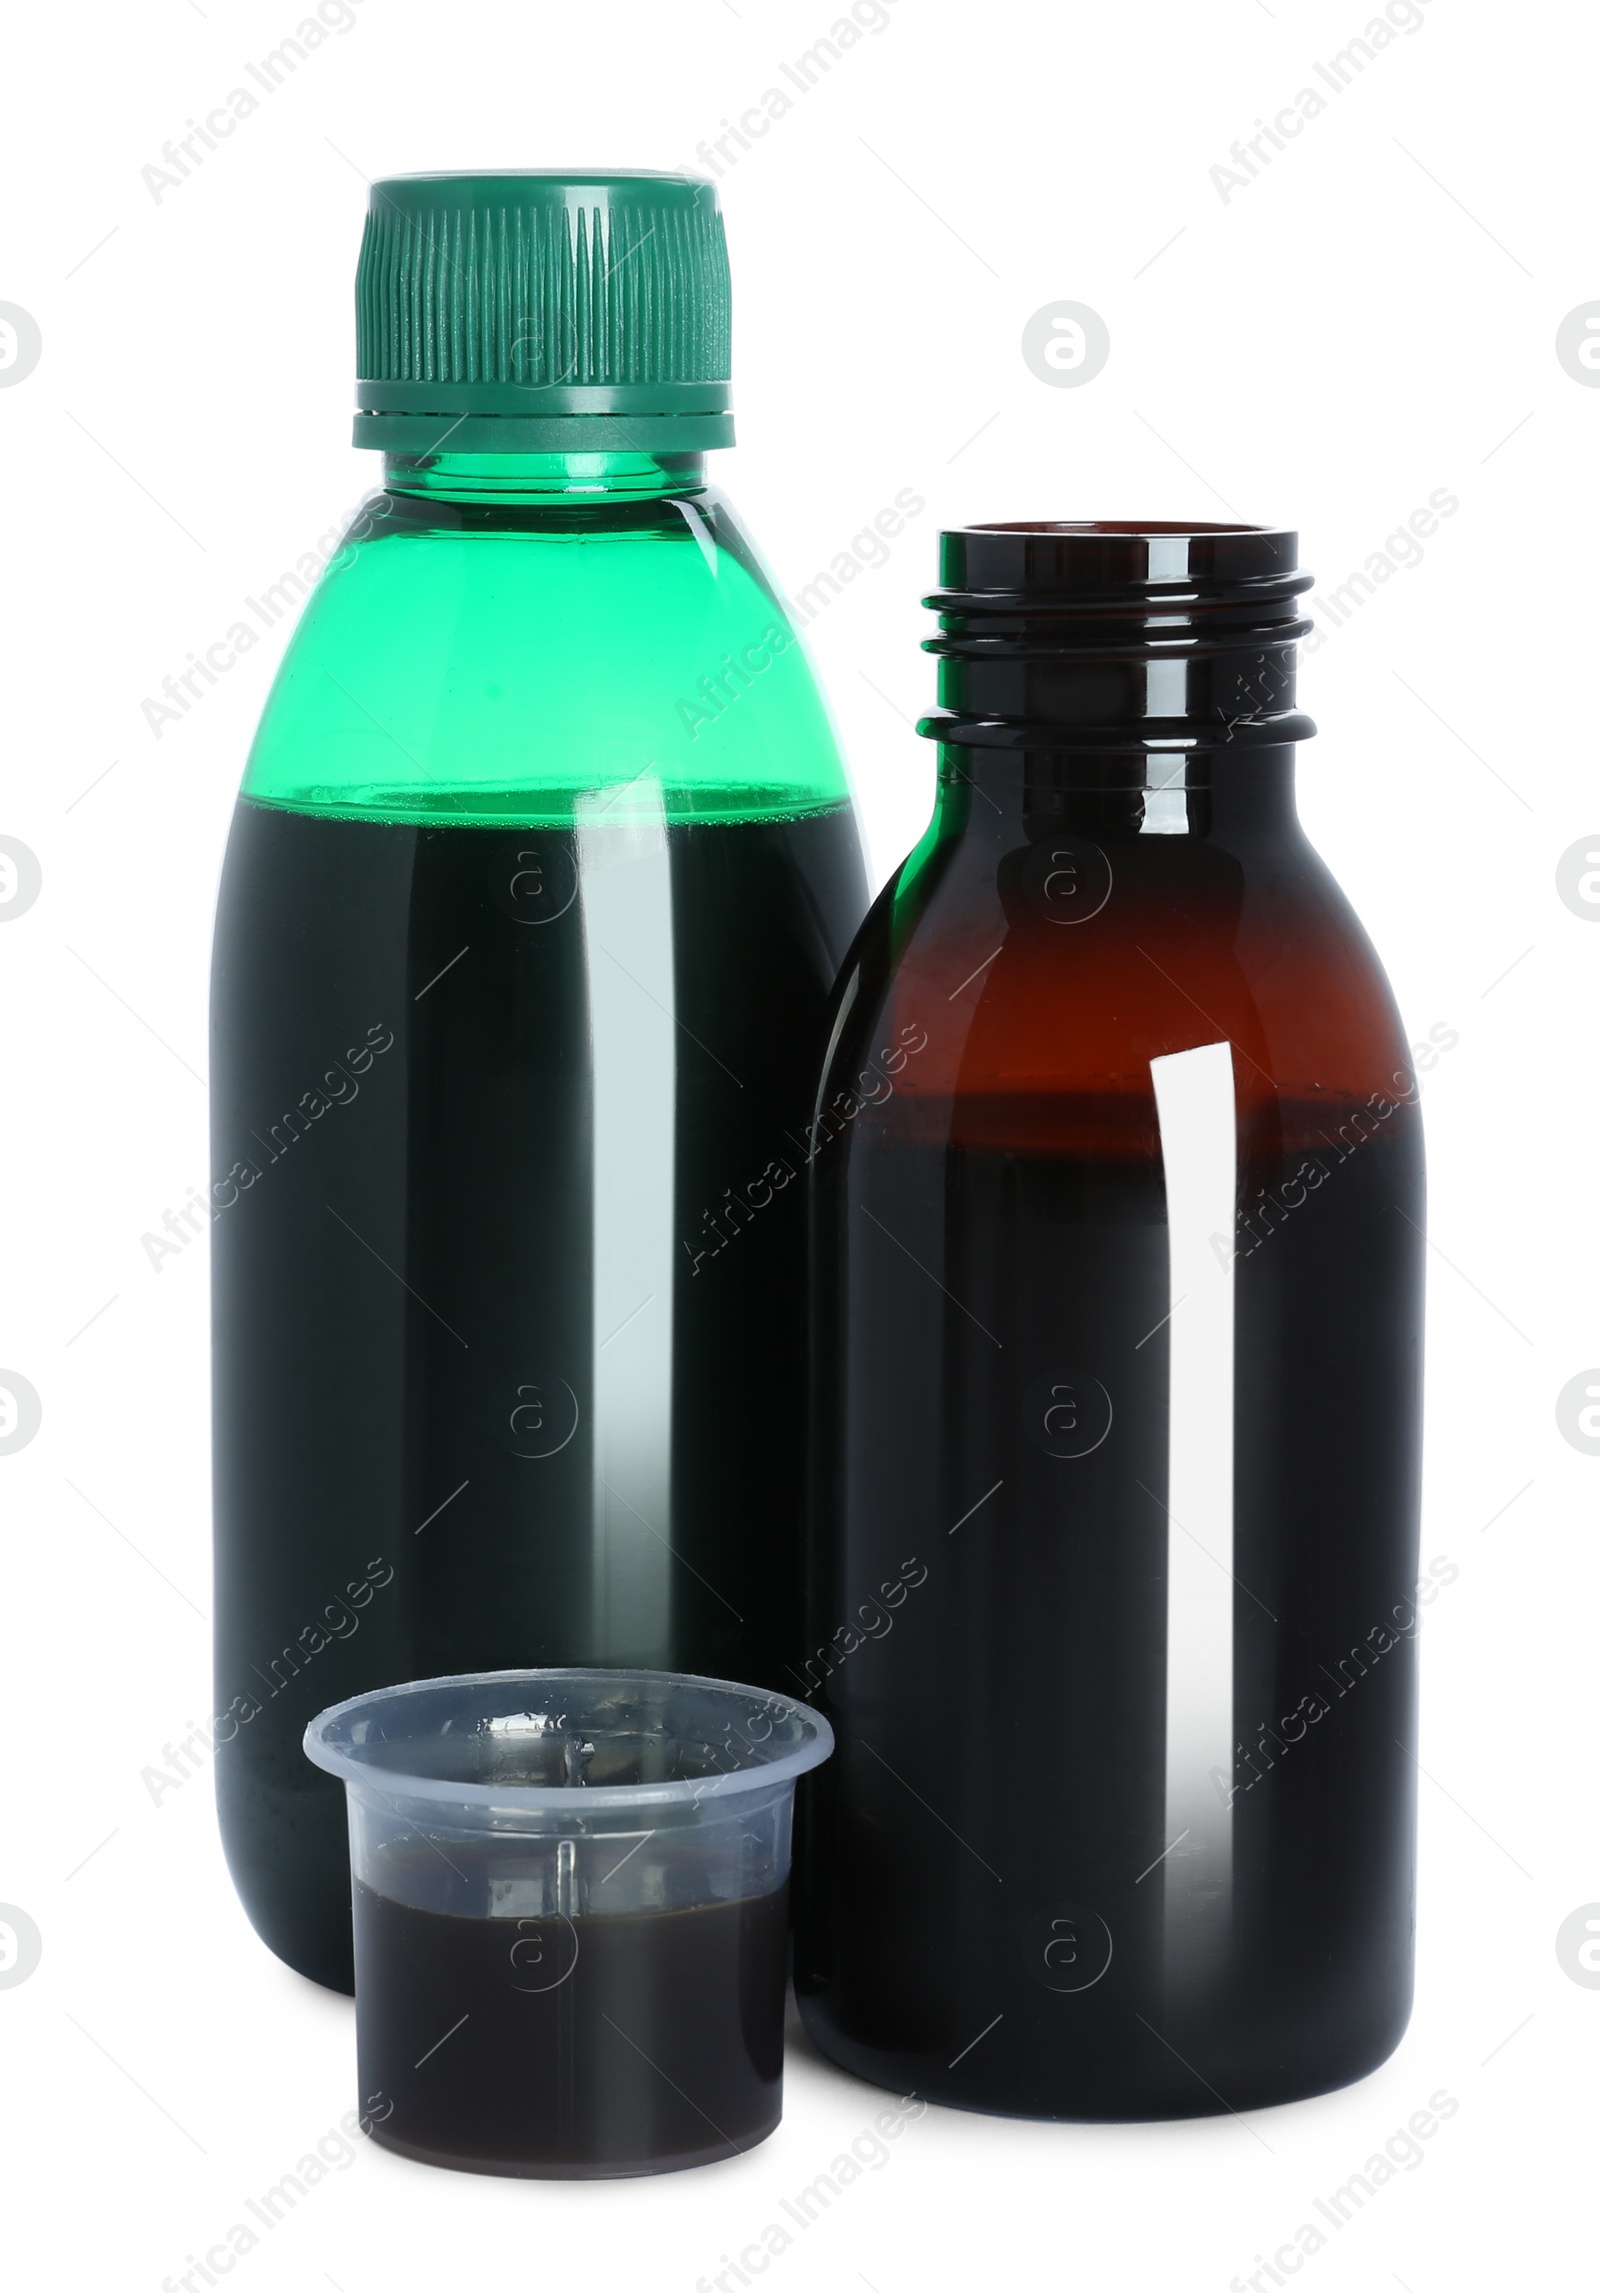 Photo of Bottles of cough syrup and measuring cup on white background